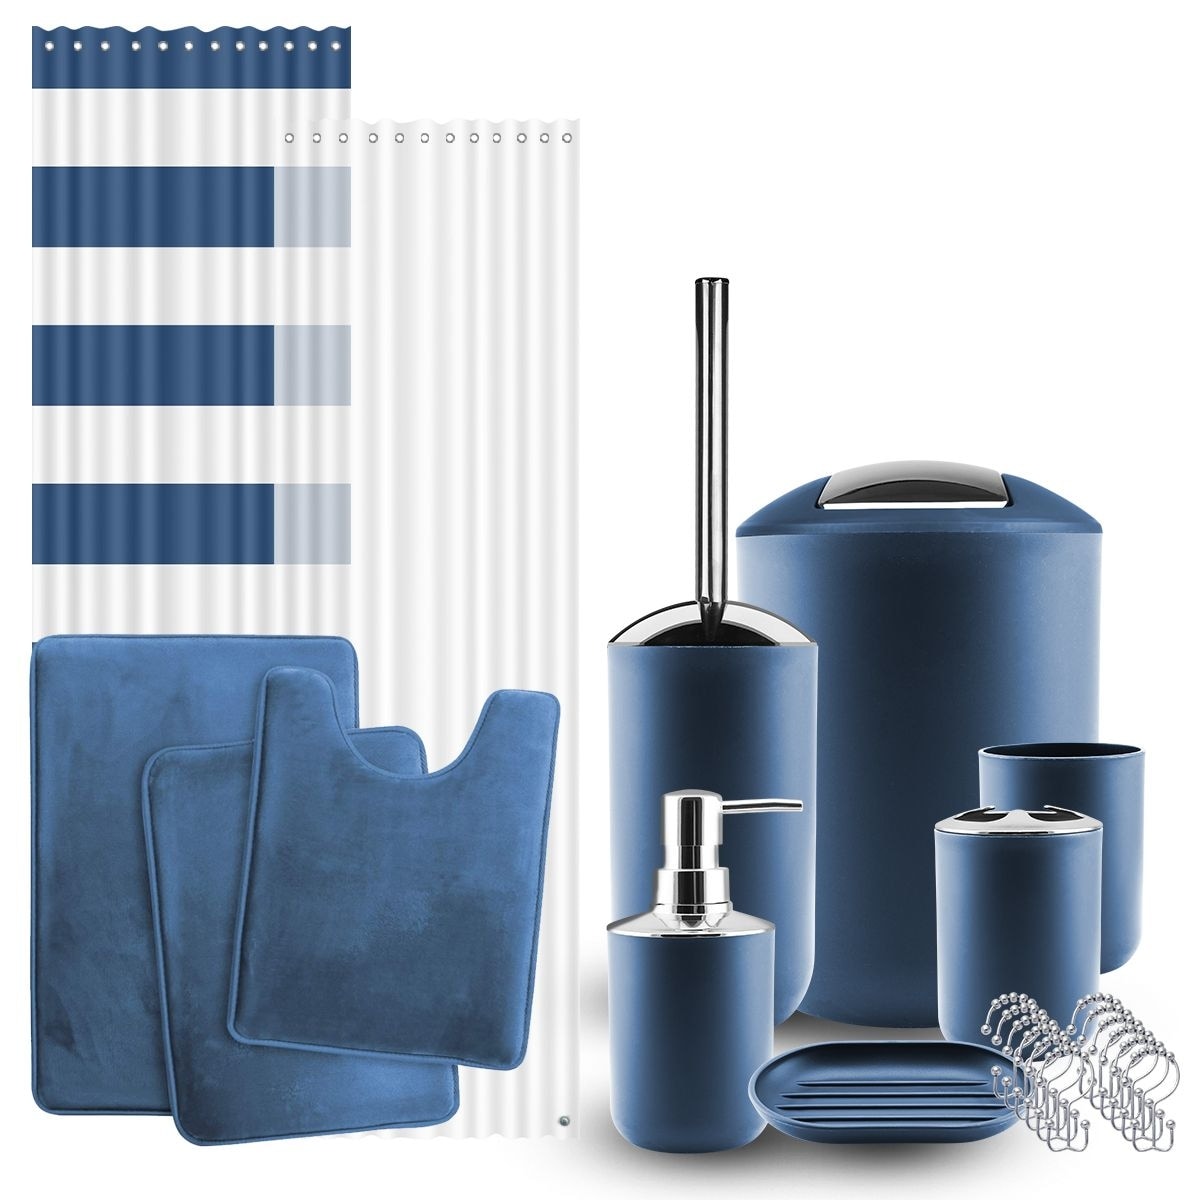 Clara Clark 12 Piece Complete Bathroom Accessories Kit with Shower Curtain Set and Rug Set Overstock - 34537209